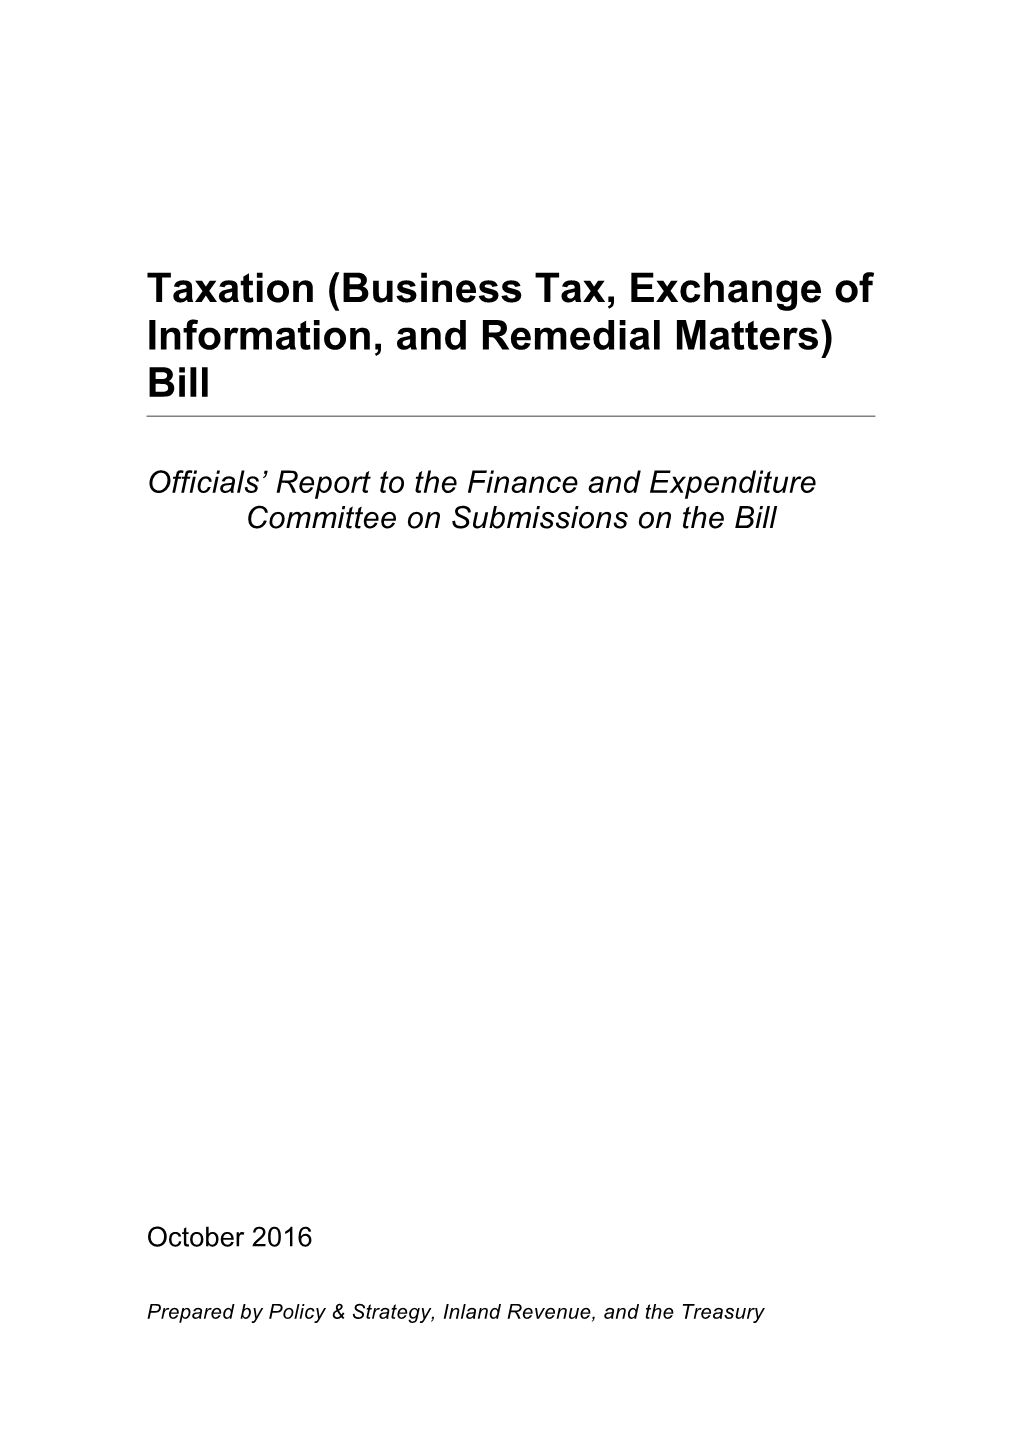 Taxation (Business Tax, Exchange of Information, and Remedial Matters) Bill: Officials